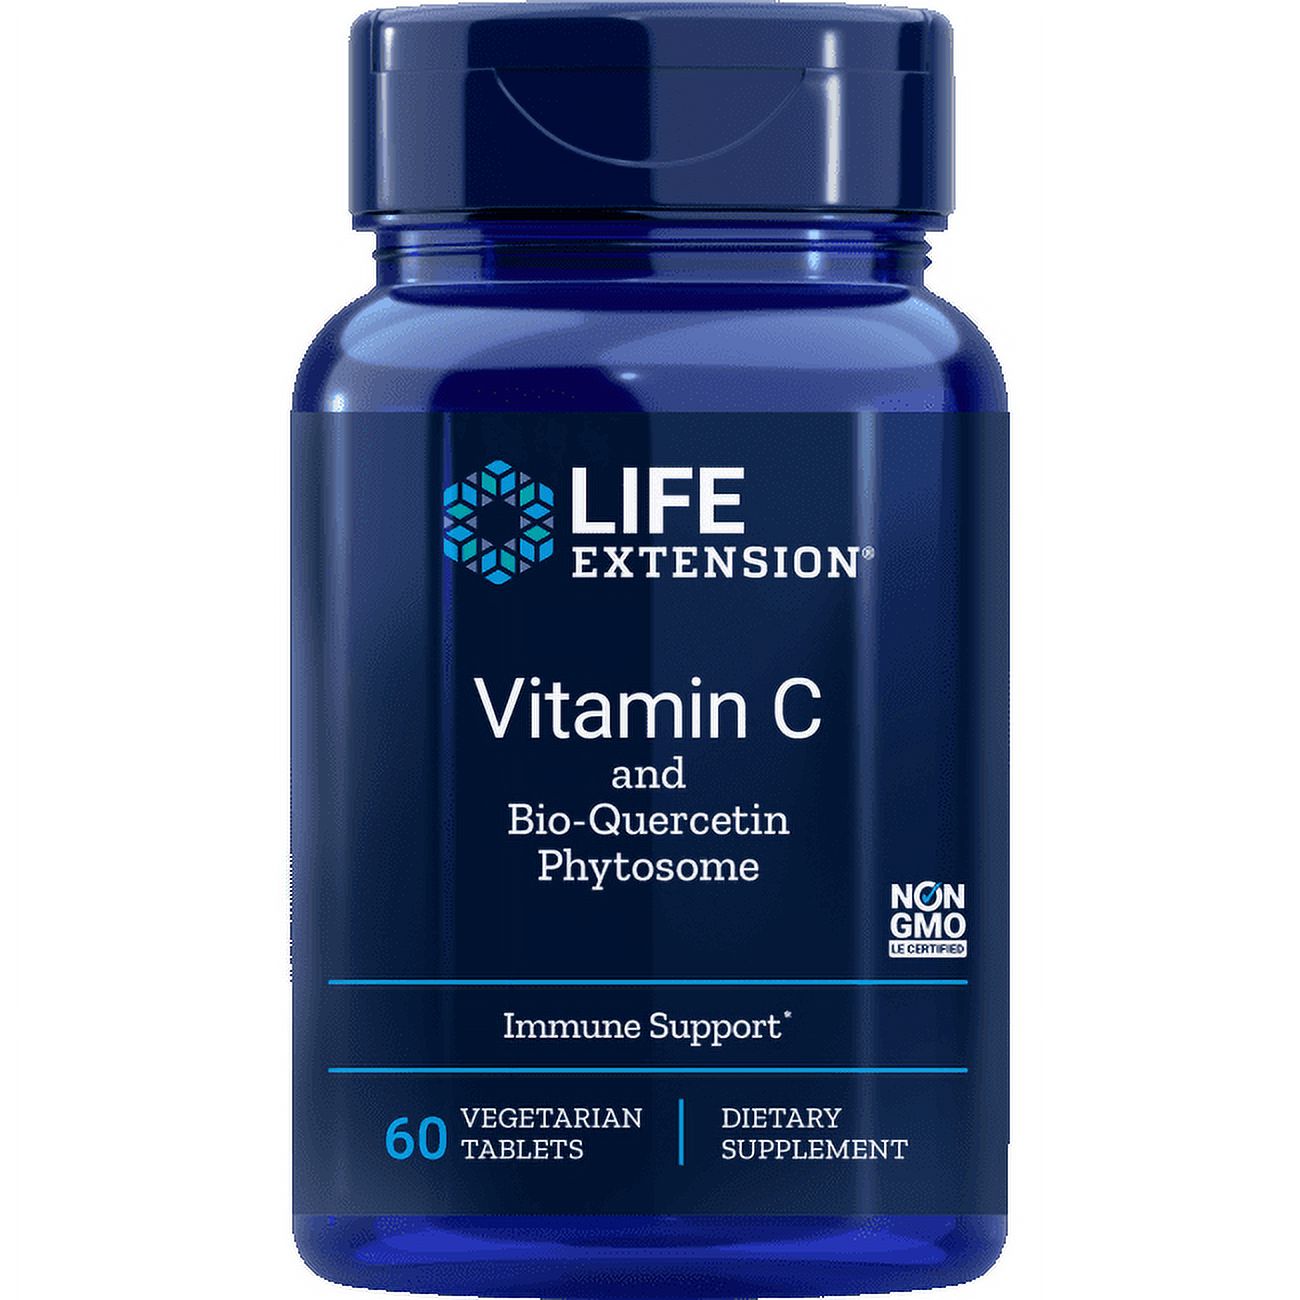 Life Extension Vitamin C and Bio-Quercetin Phytosome 60 Veg Tabs - image 1 of 2